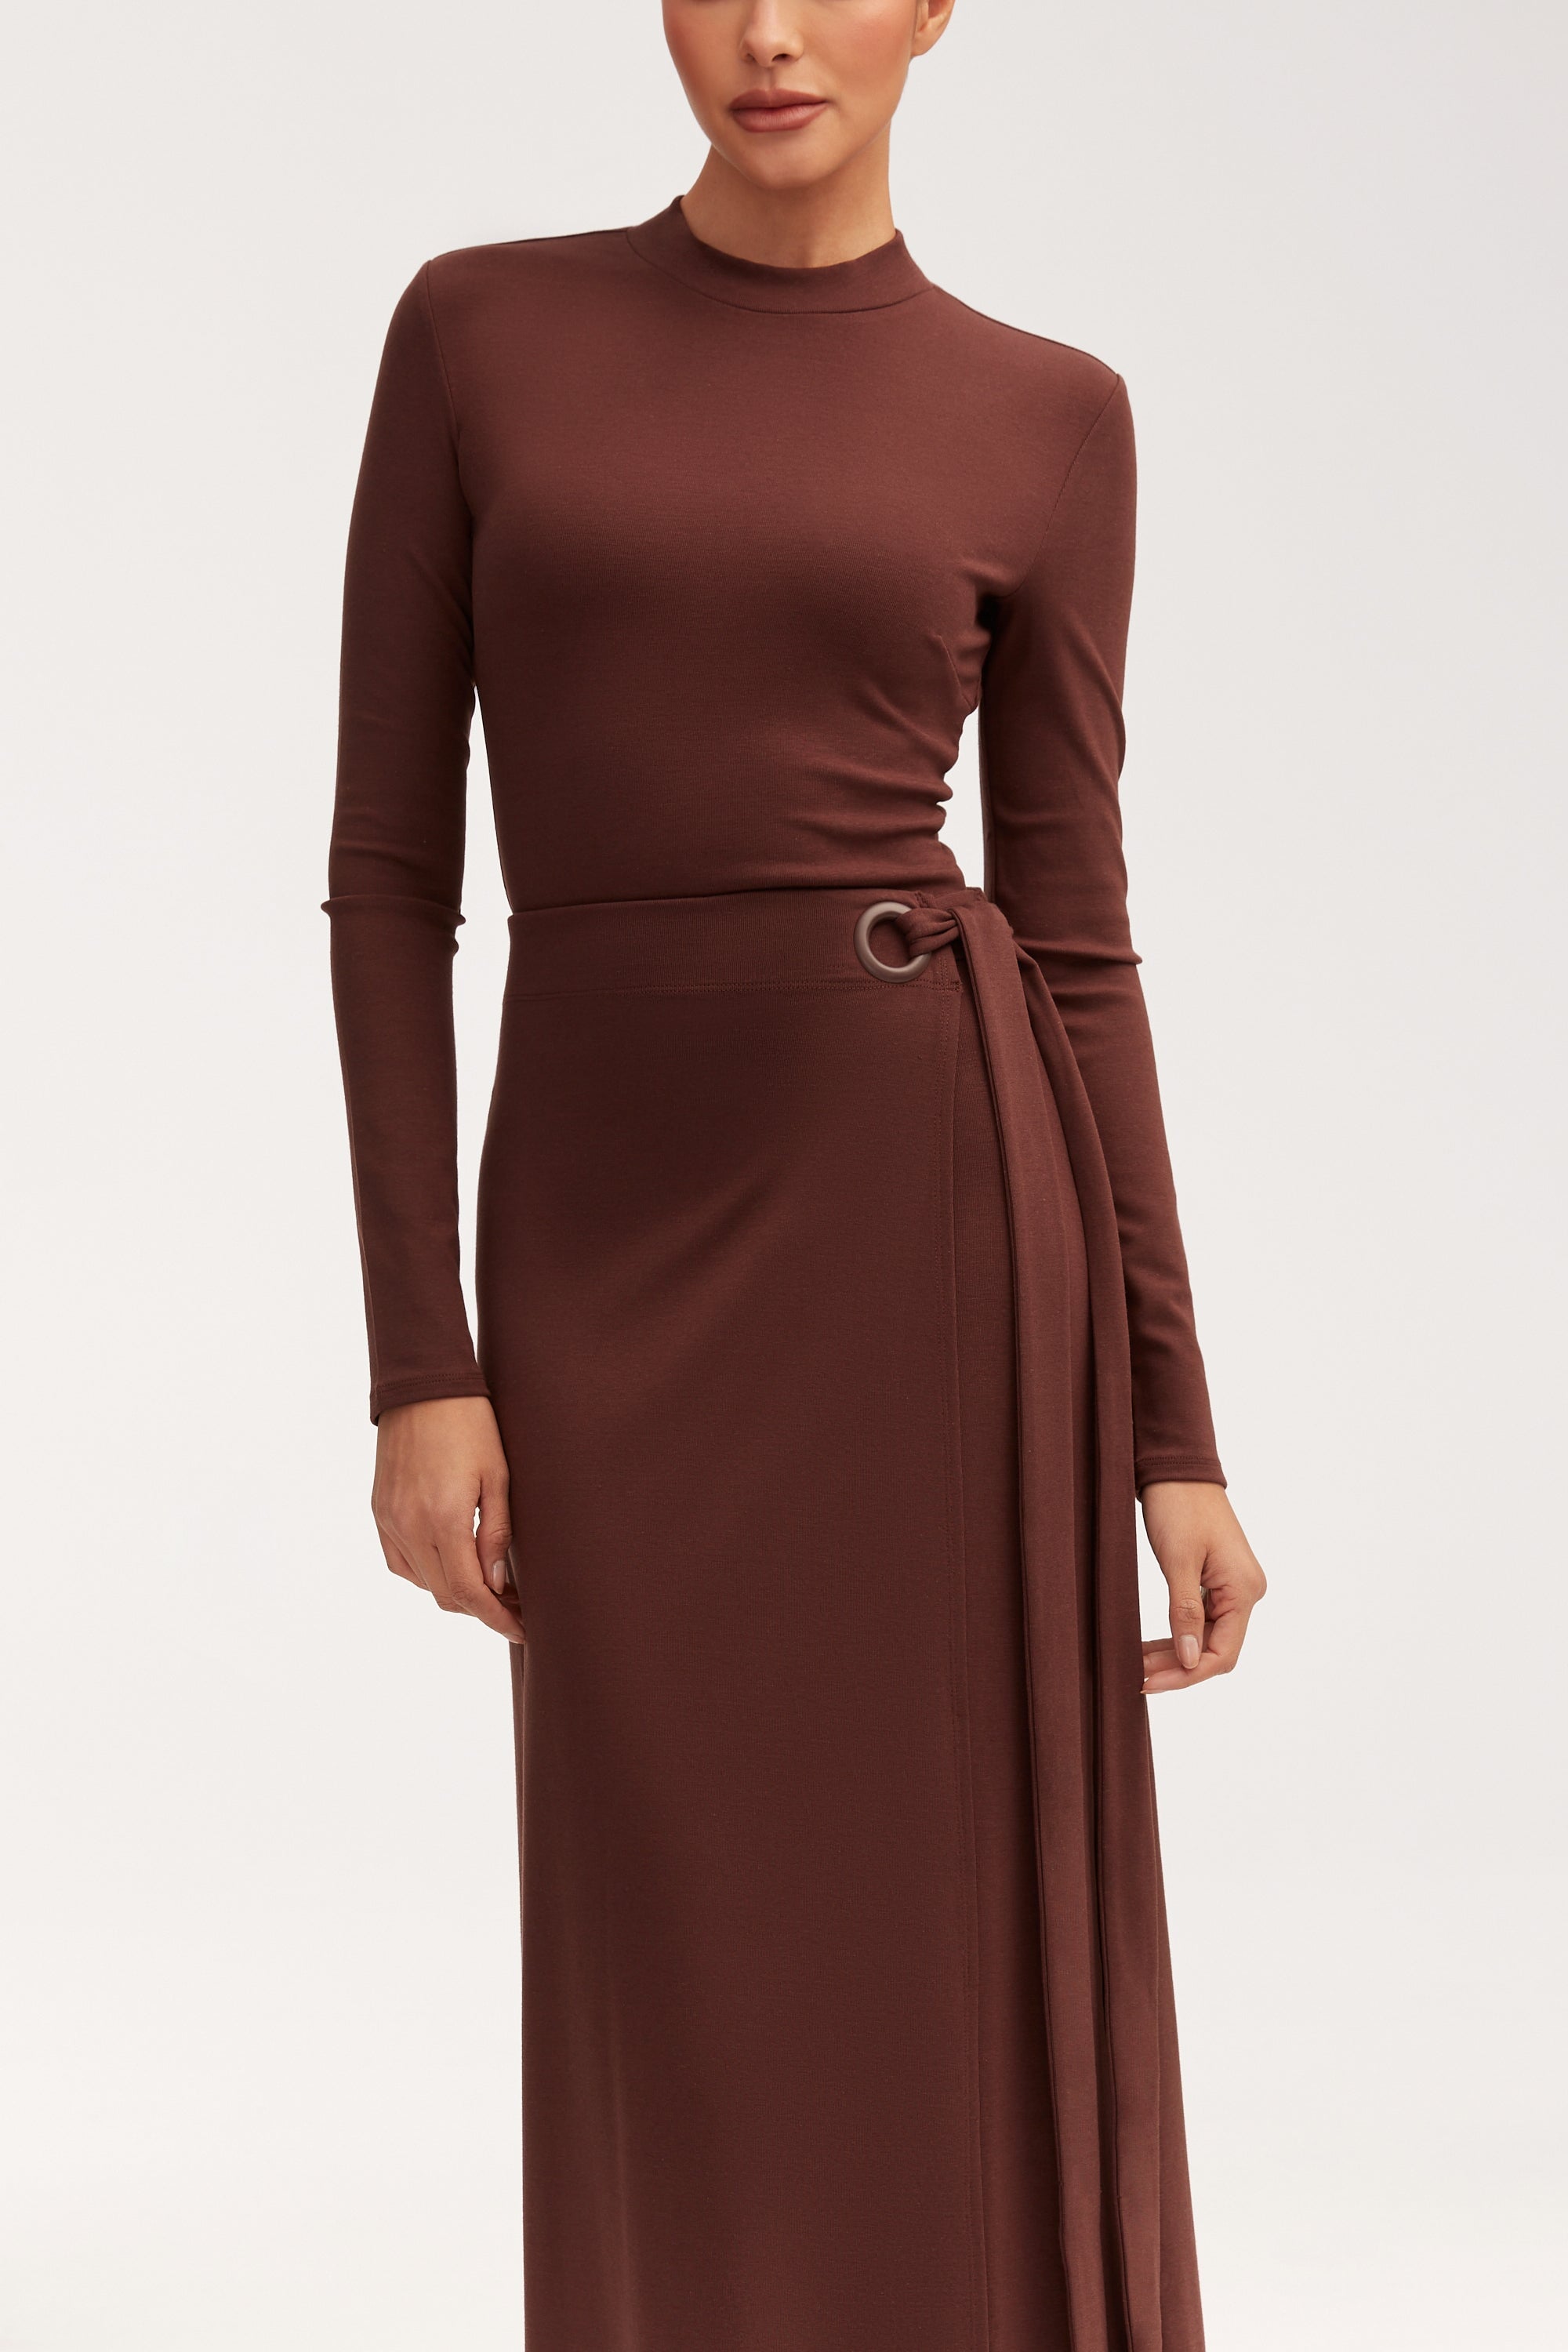 Melissa Jersey Maxi Dress with Wrap Skirt - Brown Sets epschoolboard 